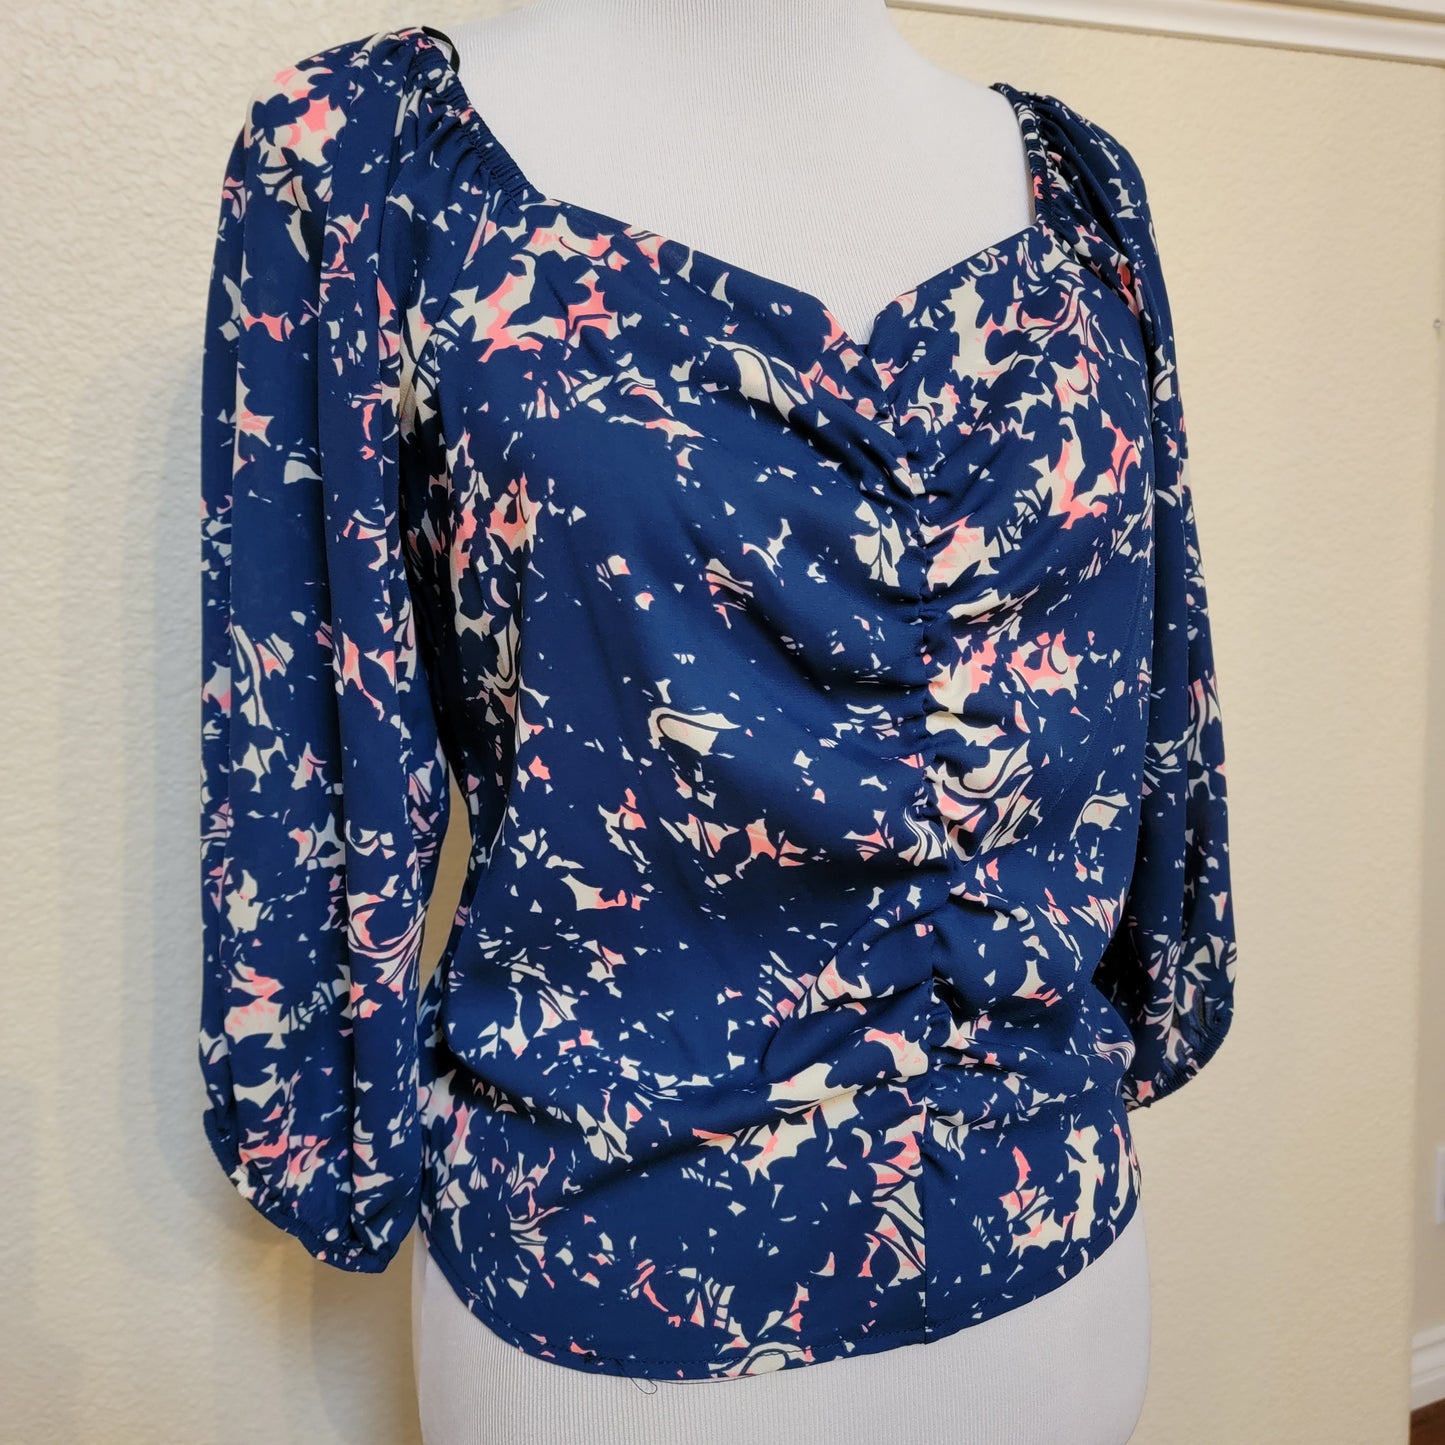 Floral Print Abstract Top w/tie back